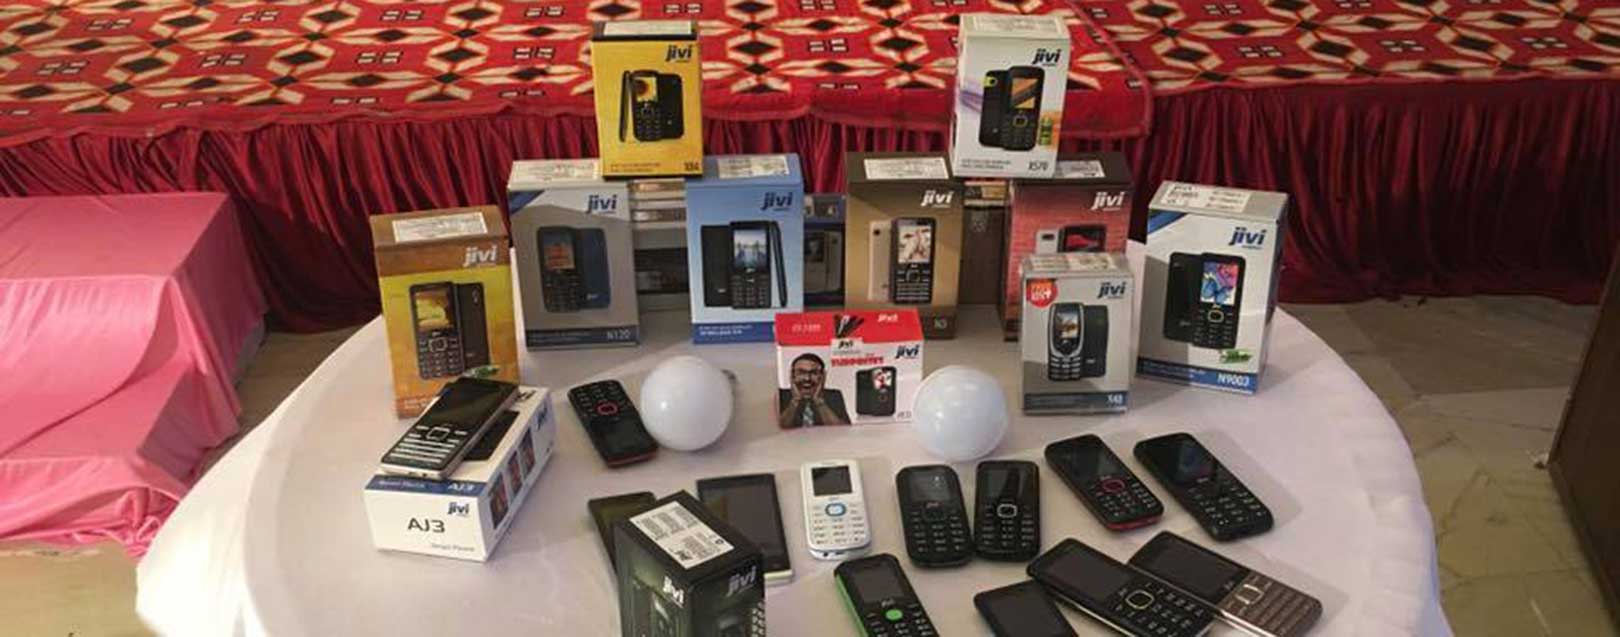 Jivi Mobiles to invest Rs.200 cr on new manufacturing unit